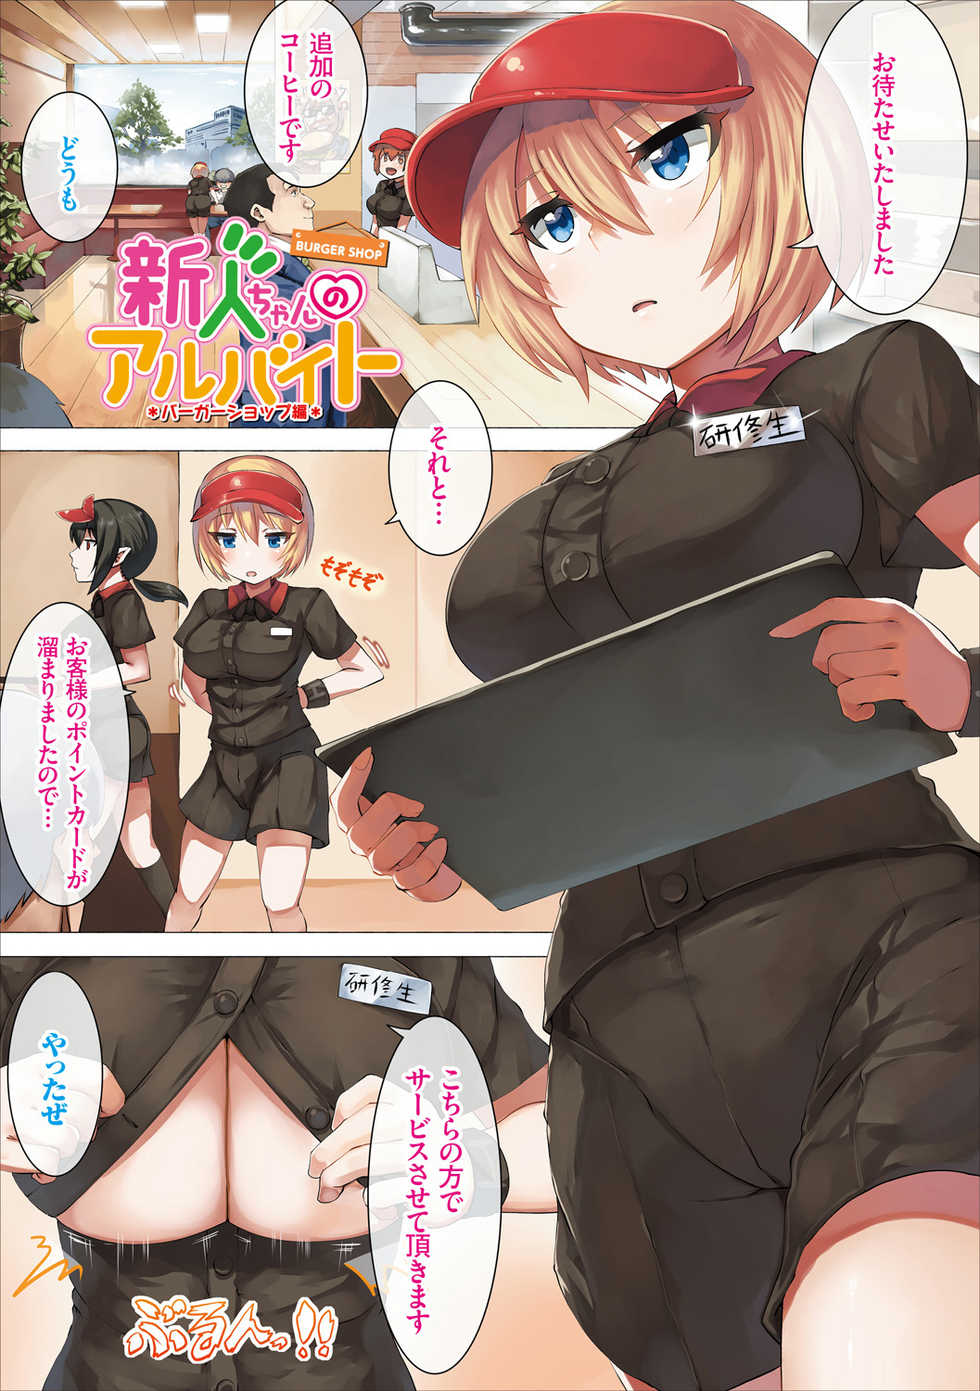 [LOLICEPT] Shinjin-chan no Arbeit - New Girl's Part-Time Job [Digital] - Page 3